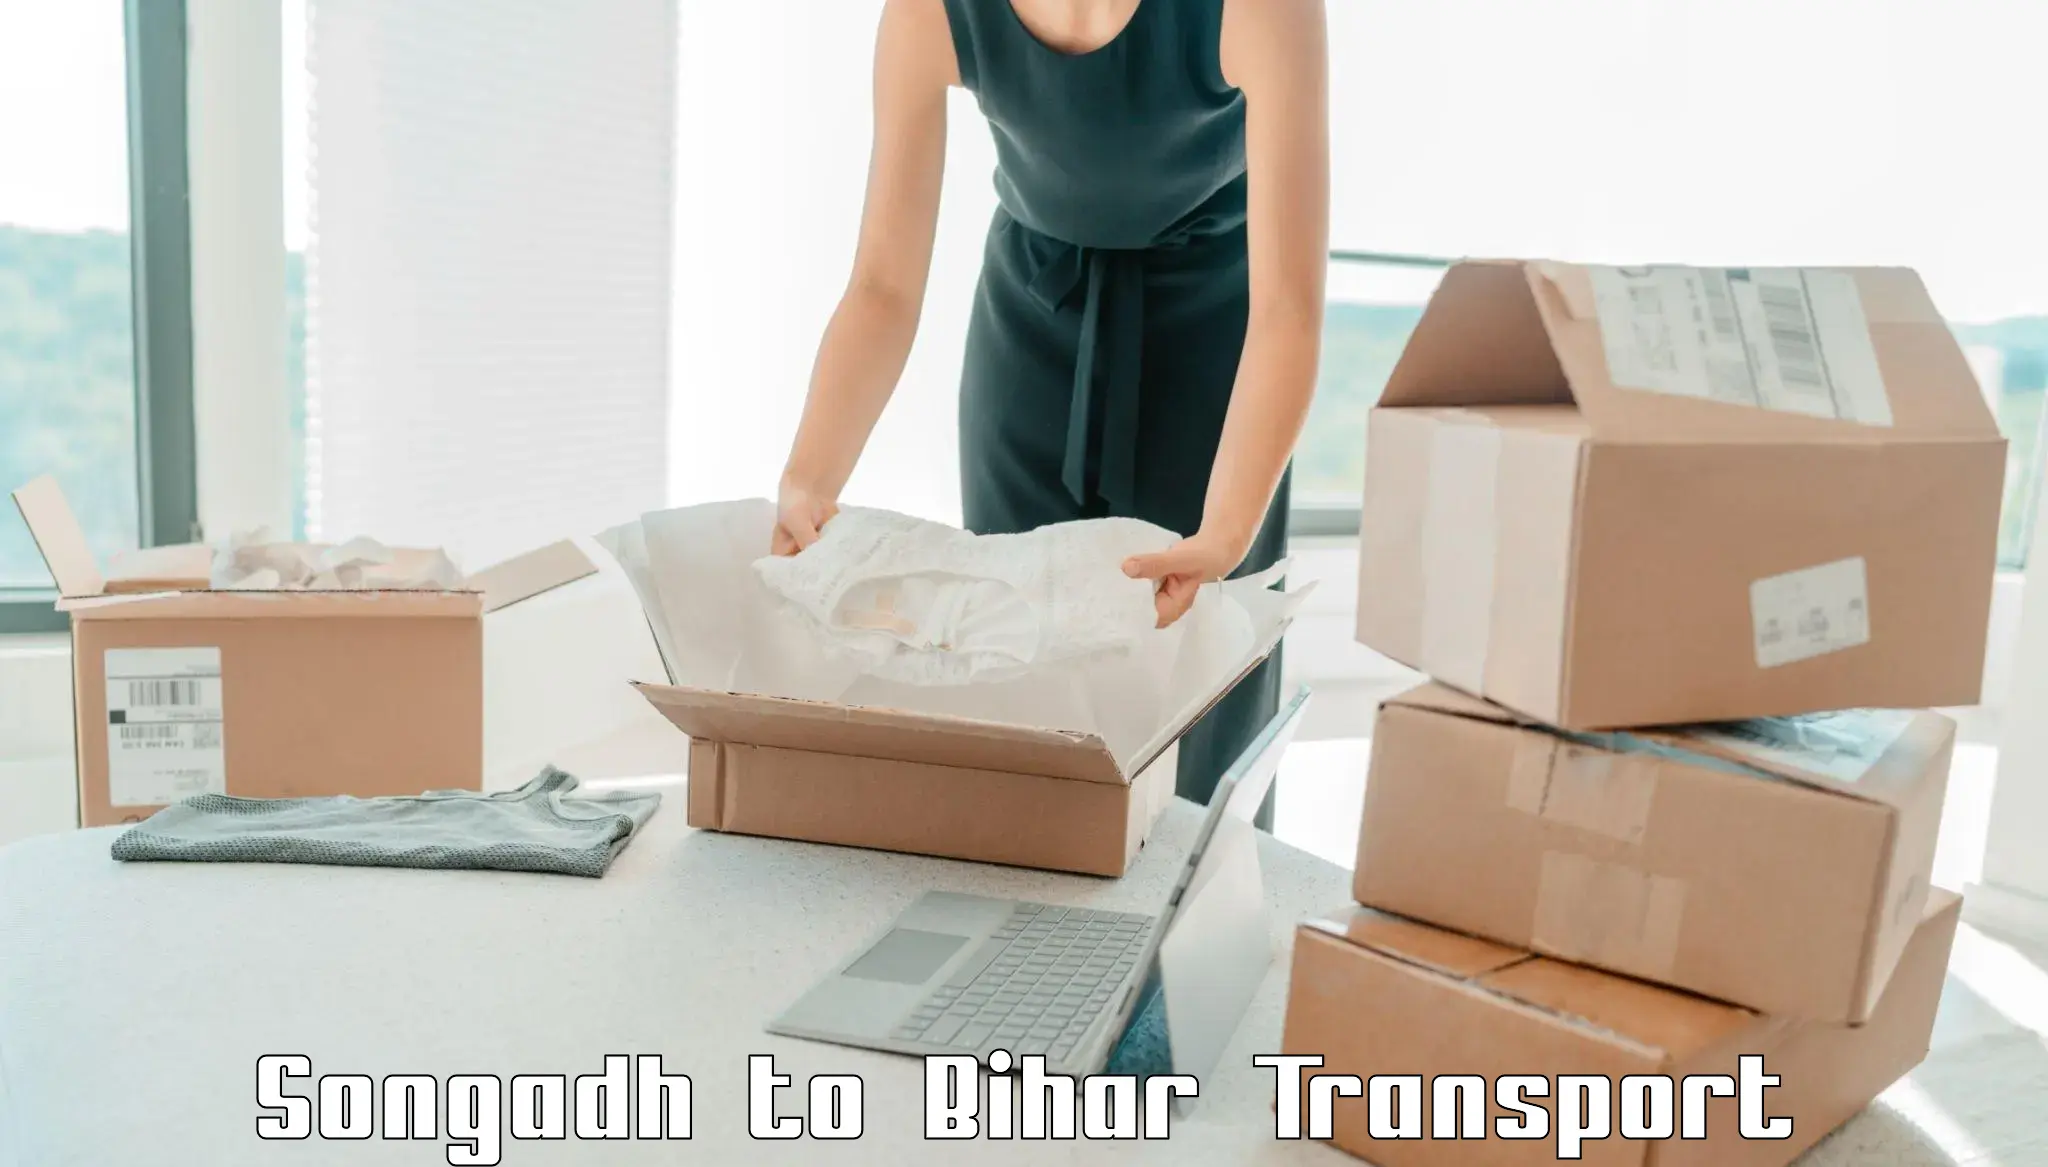 Goods transport services Songadh to Dhaka